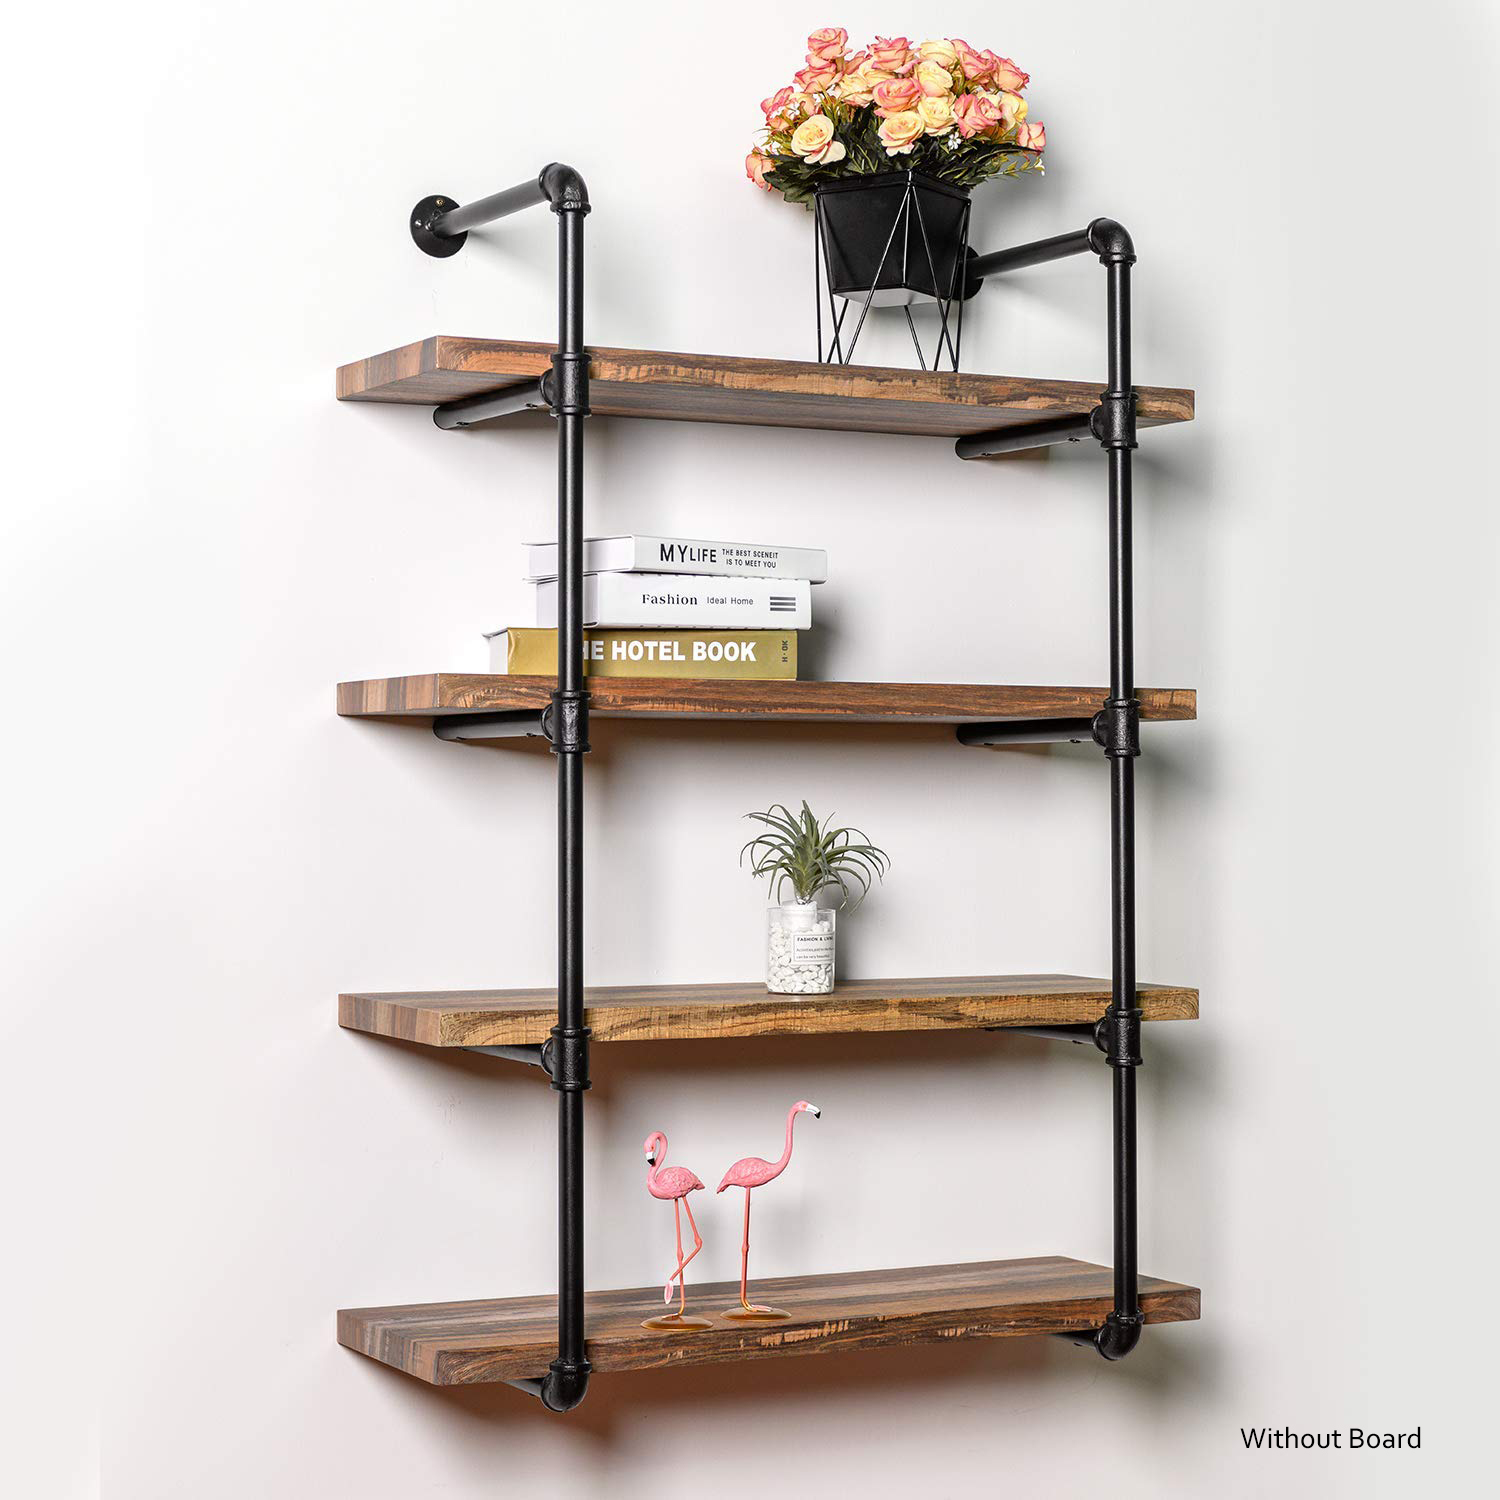 2Pcs 4/5-Tier Industrial Iron Pipe Shelf Brackets Wall-Mounted Bookshelf Frame, Customizable DIY Shelving, Floating Open Display Storage for Home, Office, Commercial Use - image 2 of 7